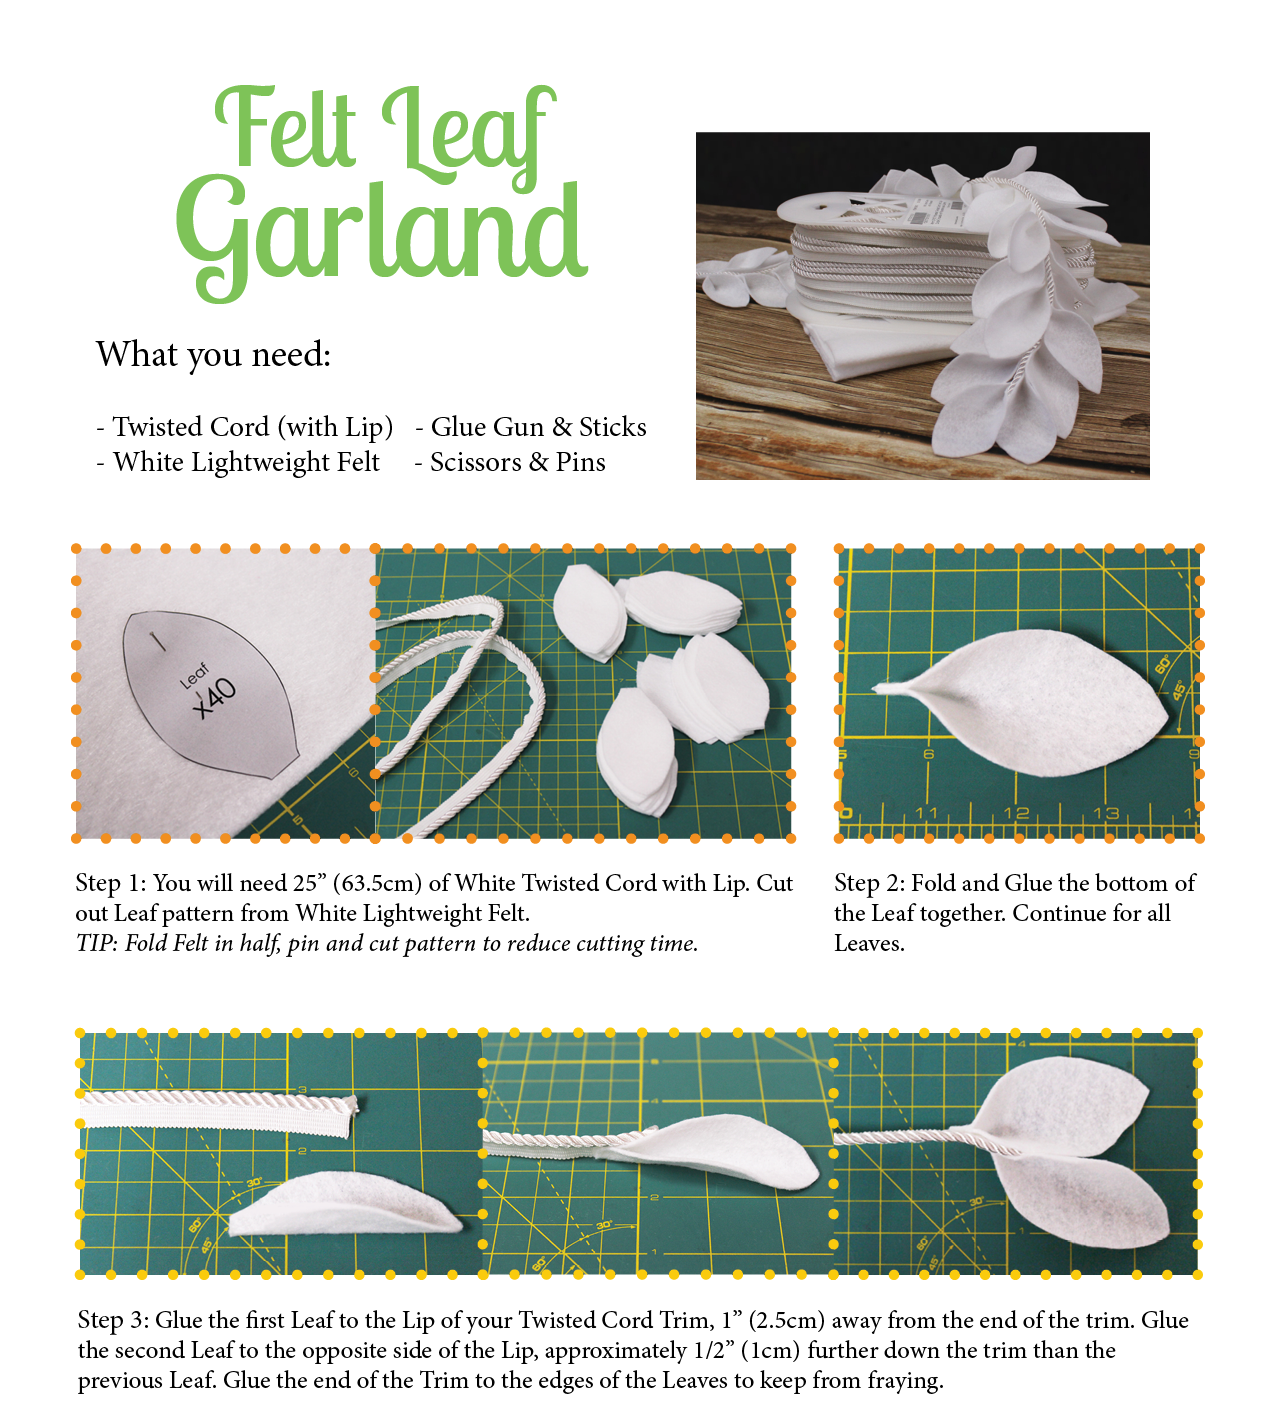 First set of steps to creating your own Felt Leaf Garland